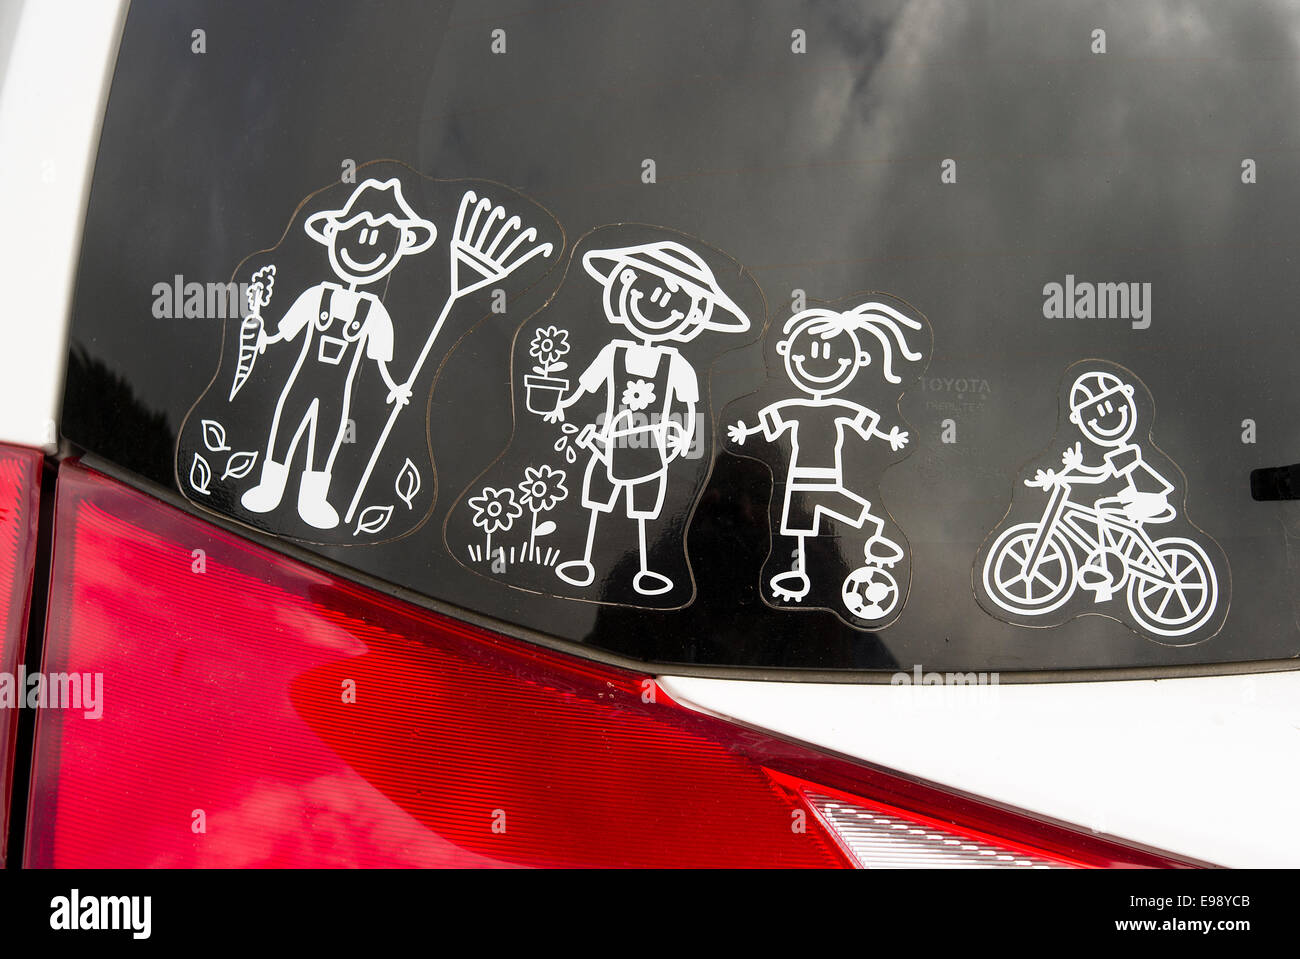 Cartoon characters depicting typical onboard MPV loads. Visible on rear window of vehicle Stock Photo